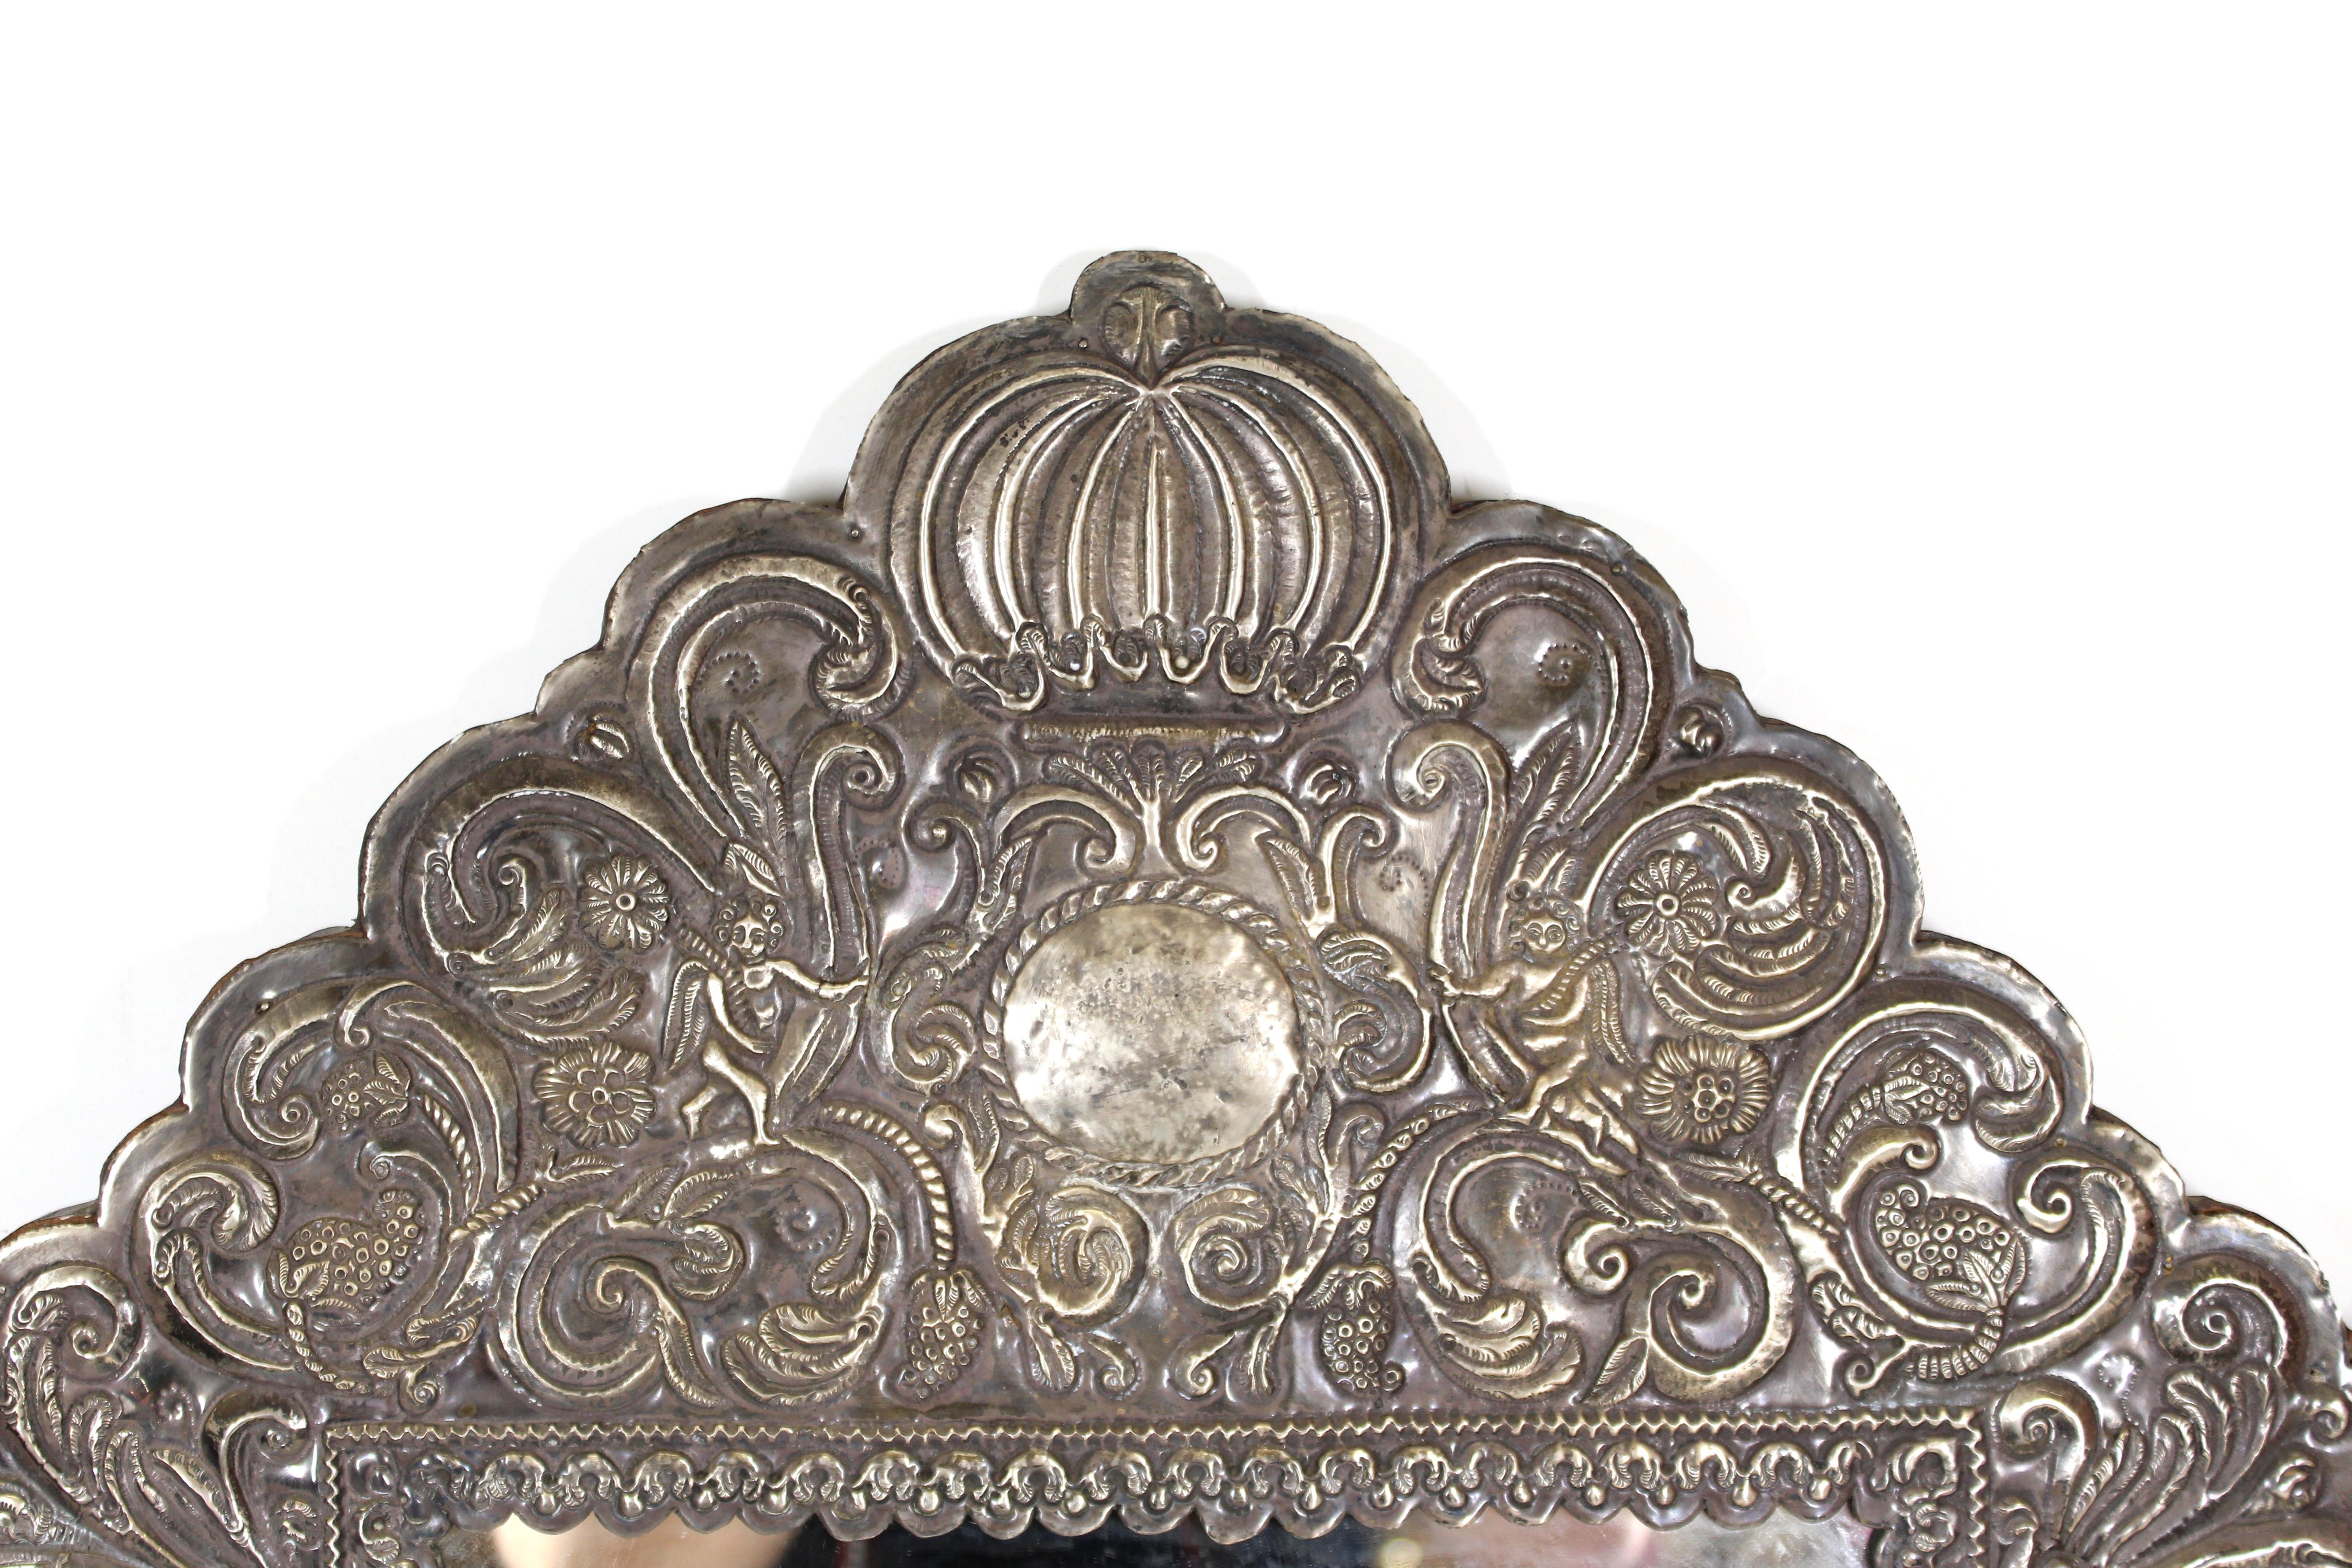 Spanish Colonial Baroque elaborate mirror frame in repoussé silver on wood frame. The piece has a vast amount of details with volutes and foliage, angels, mermaids, allegories, parrots and a crowning crest on the top. handmade during the late